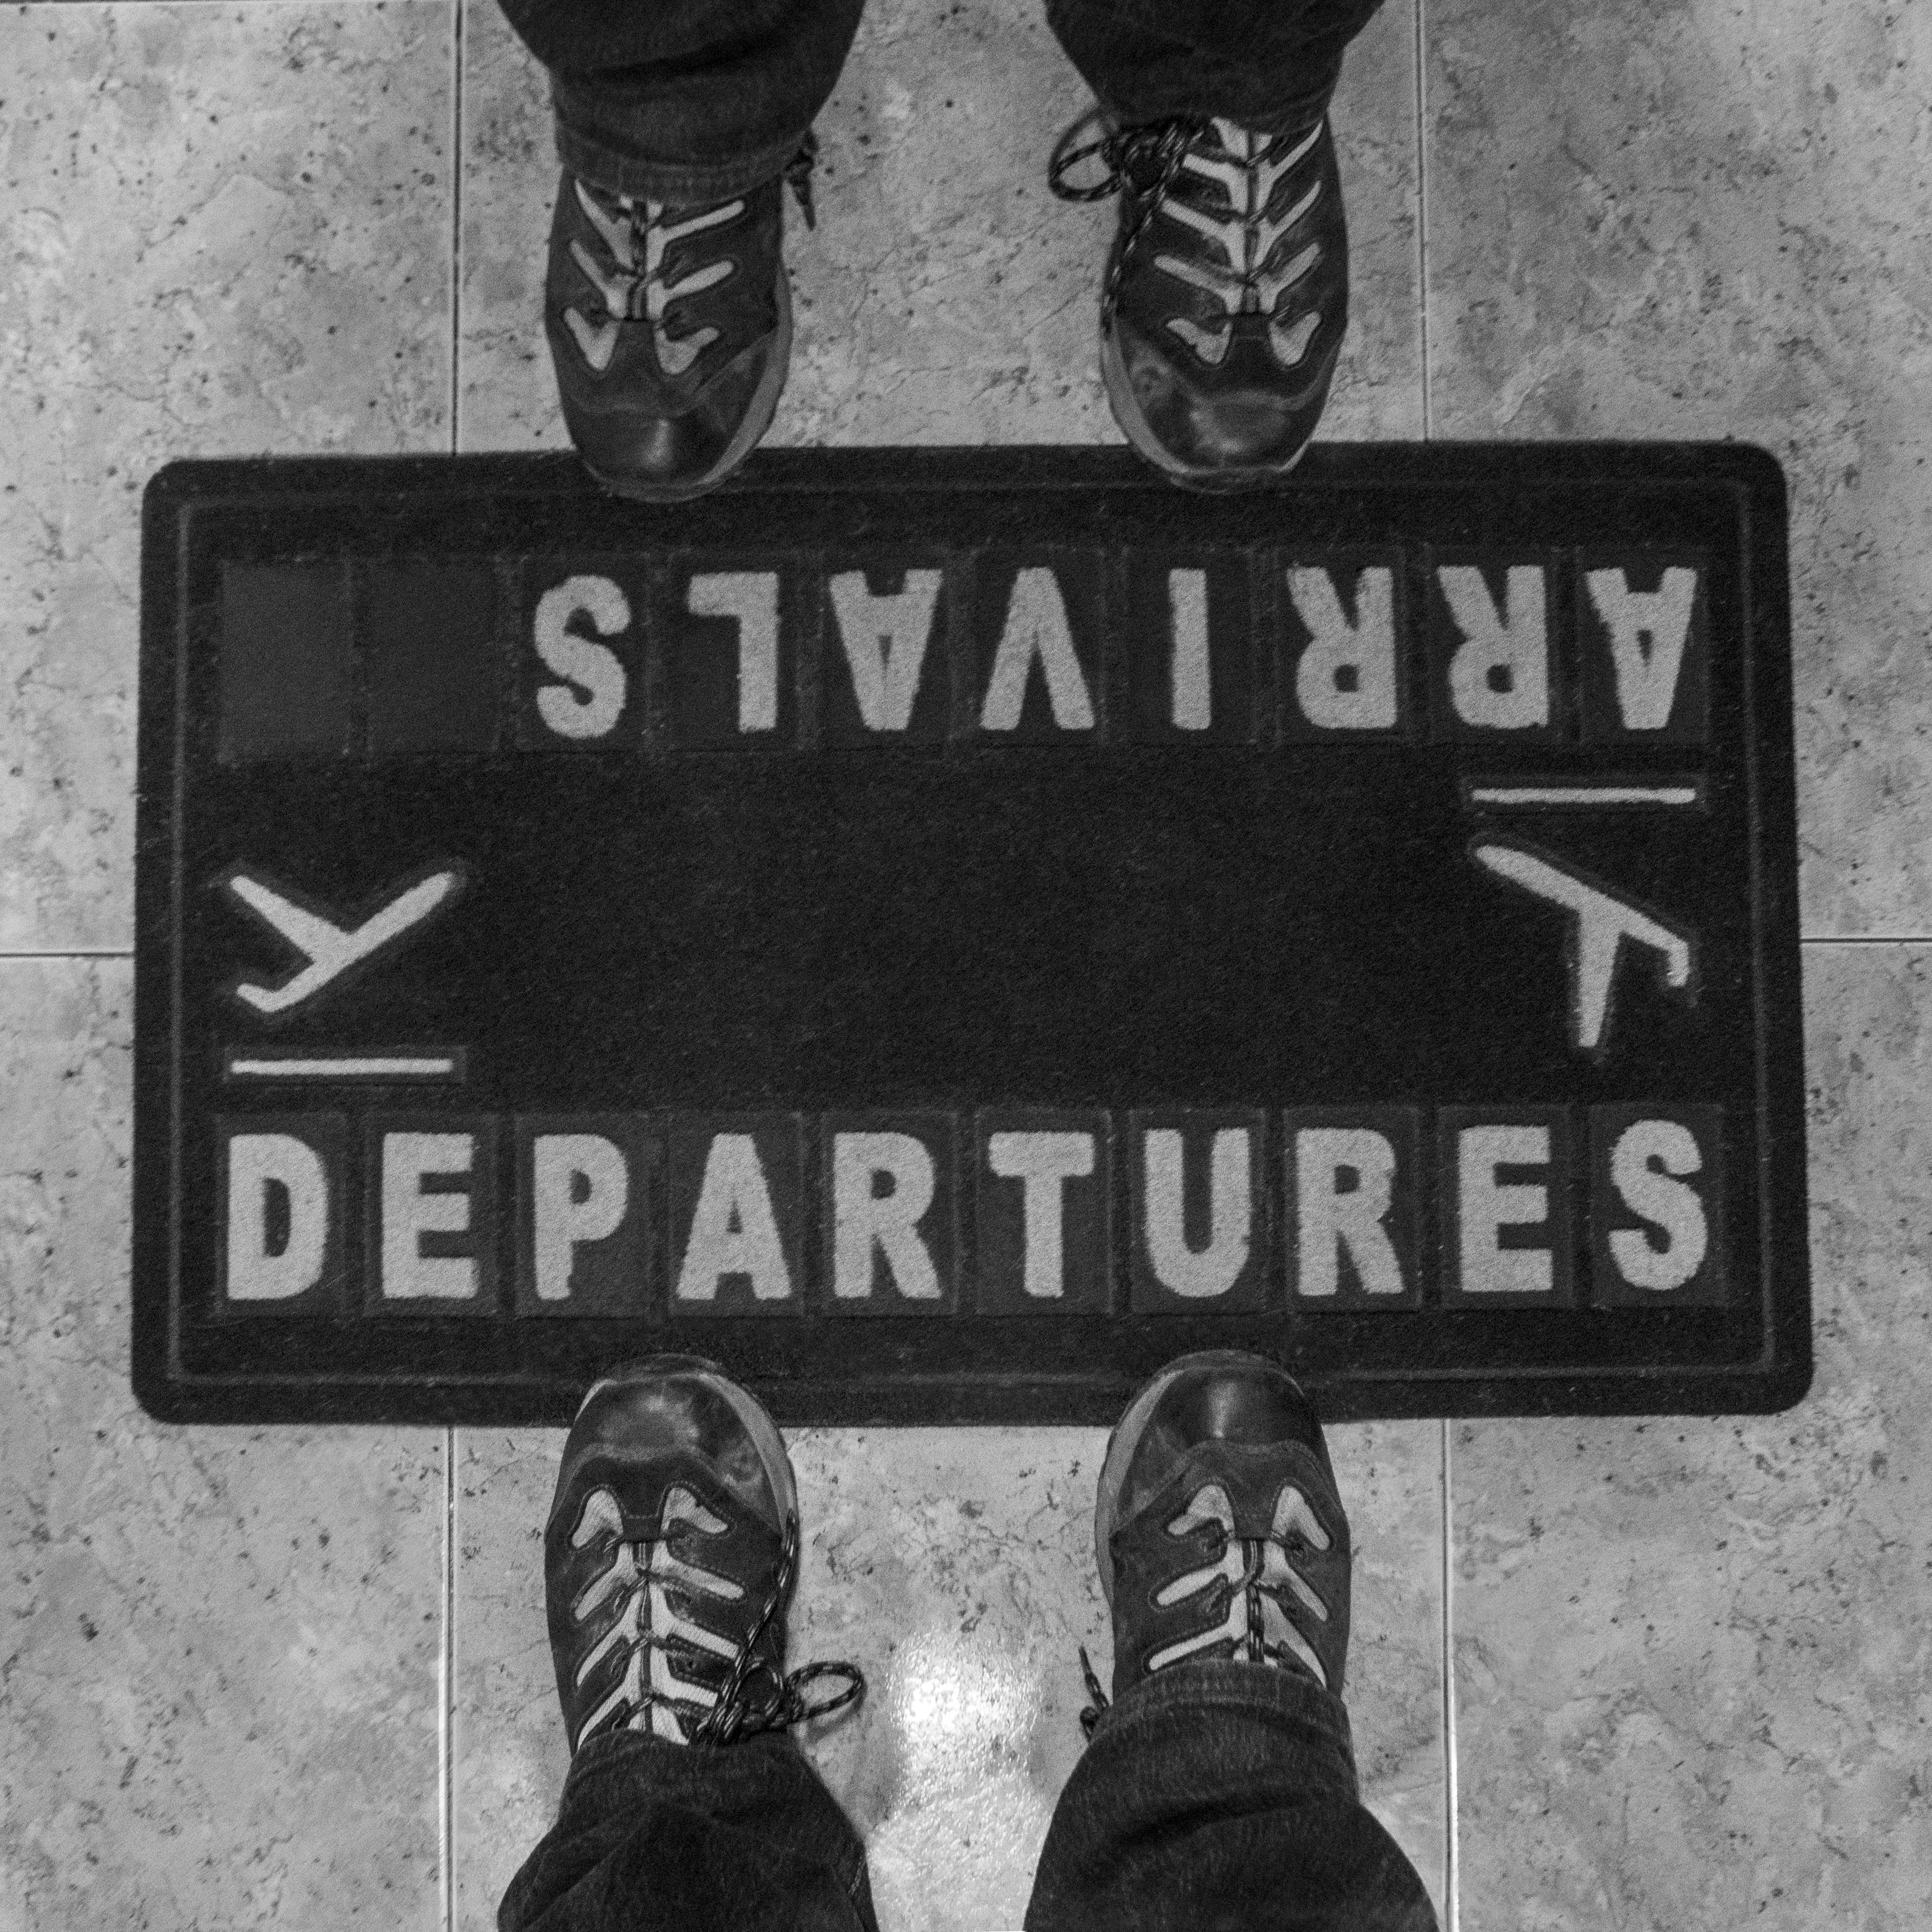 A welcome mat which says “arrivals” on one side and “departures” on the other